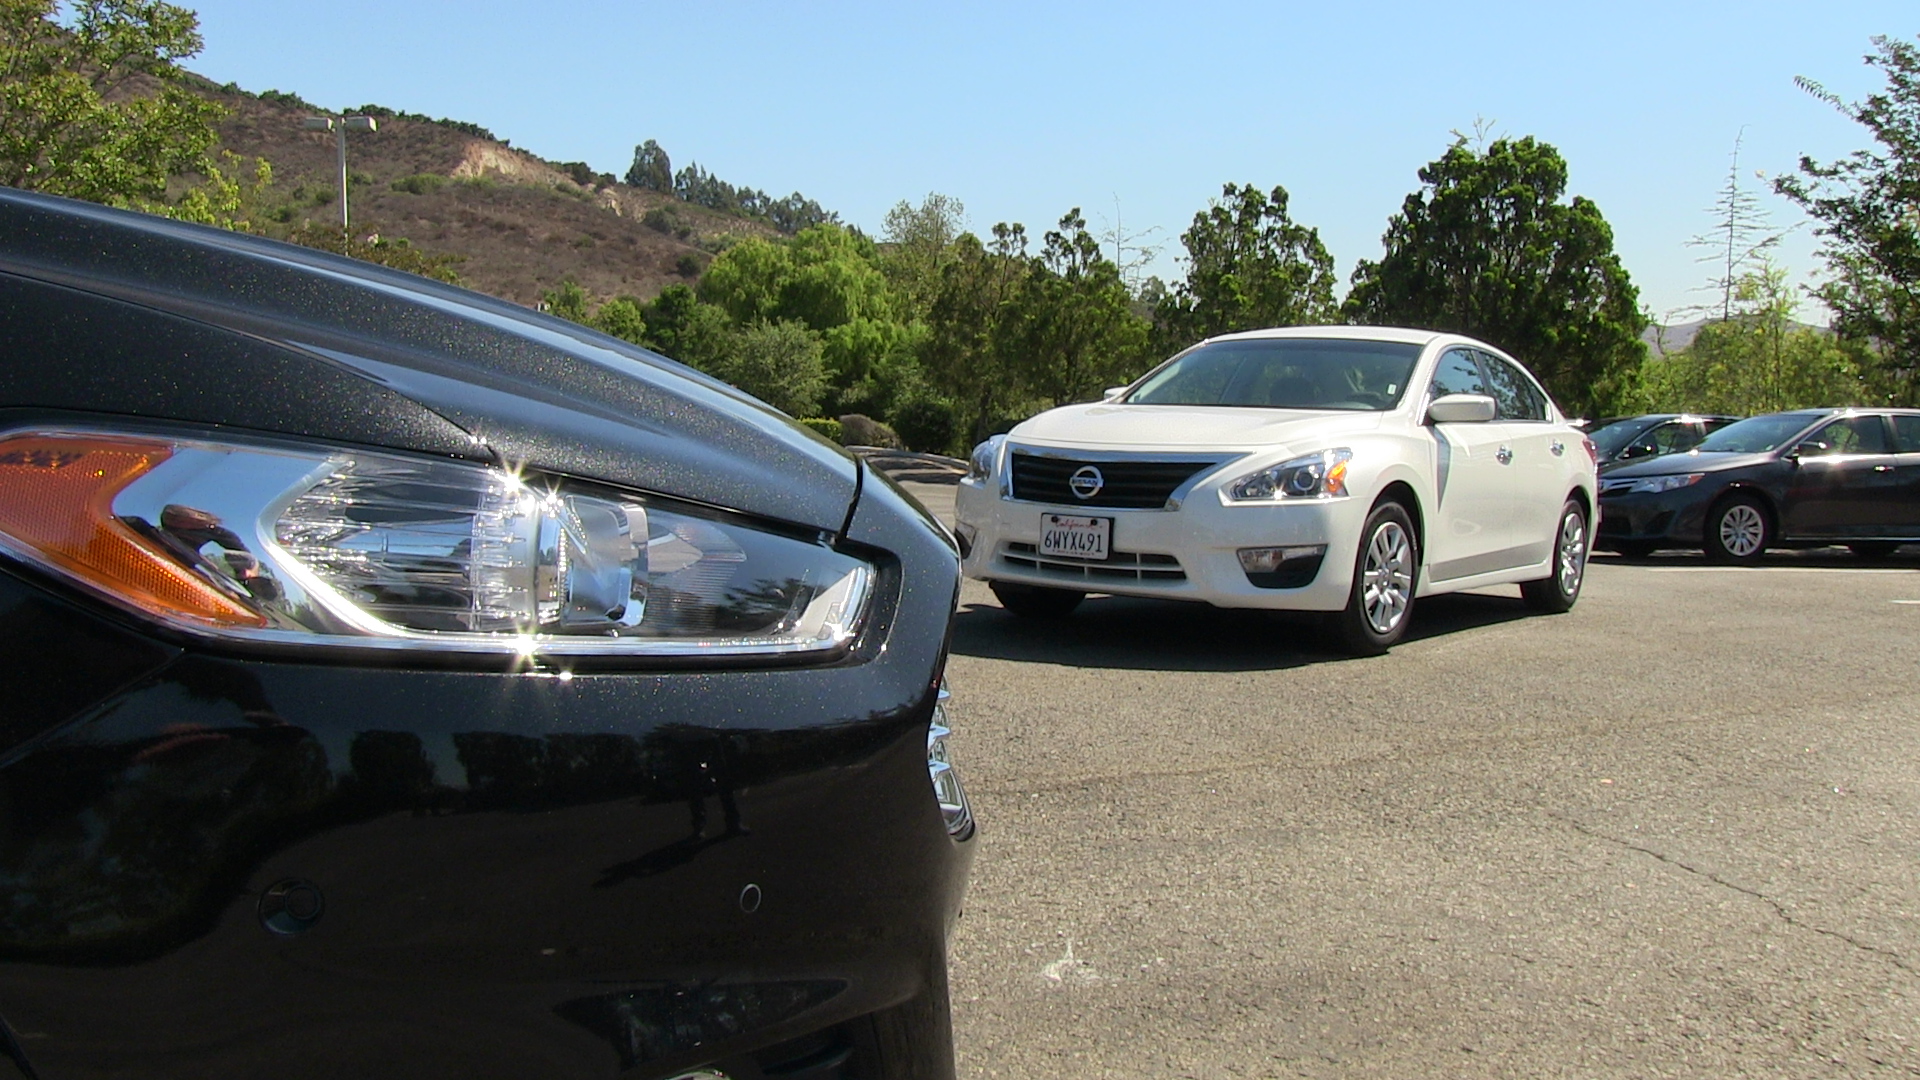 2013 ford fusion vs 2012 toyota camry #1